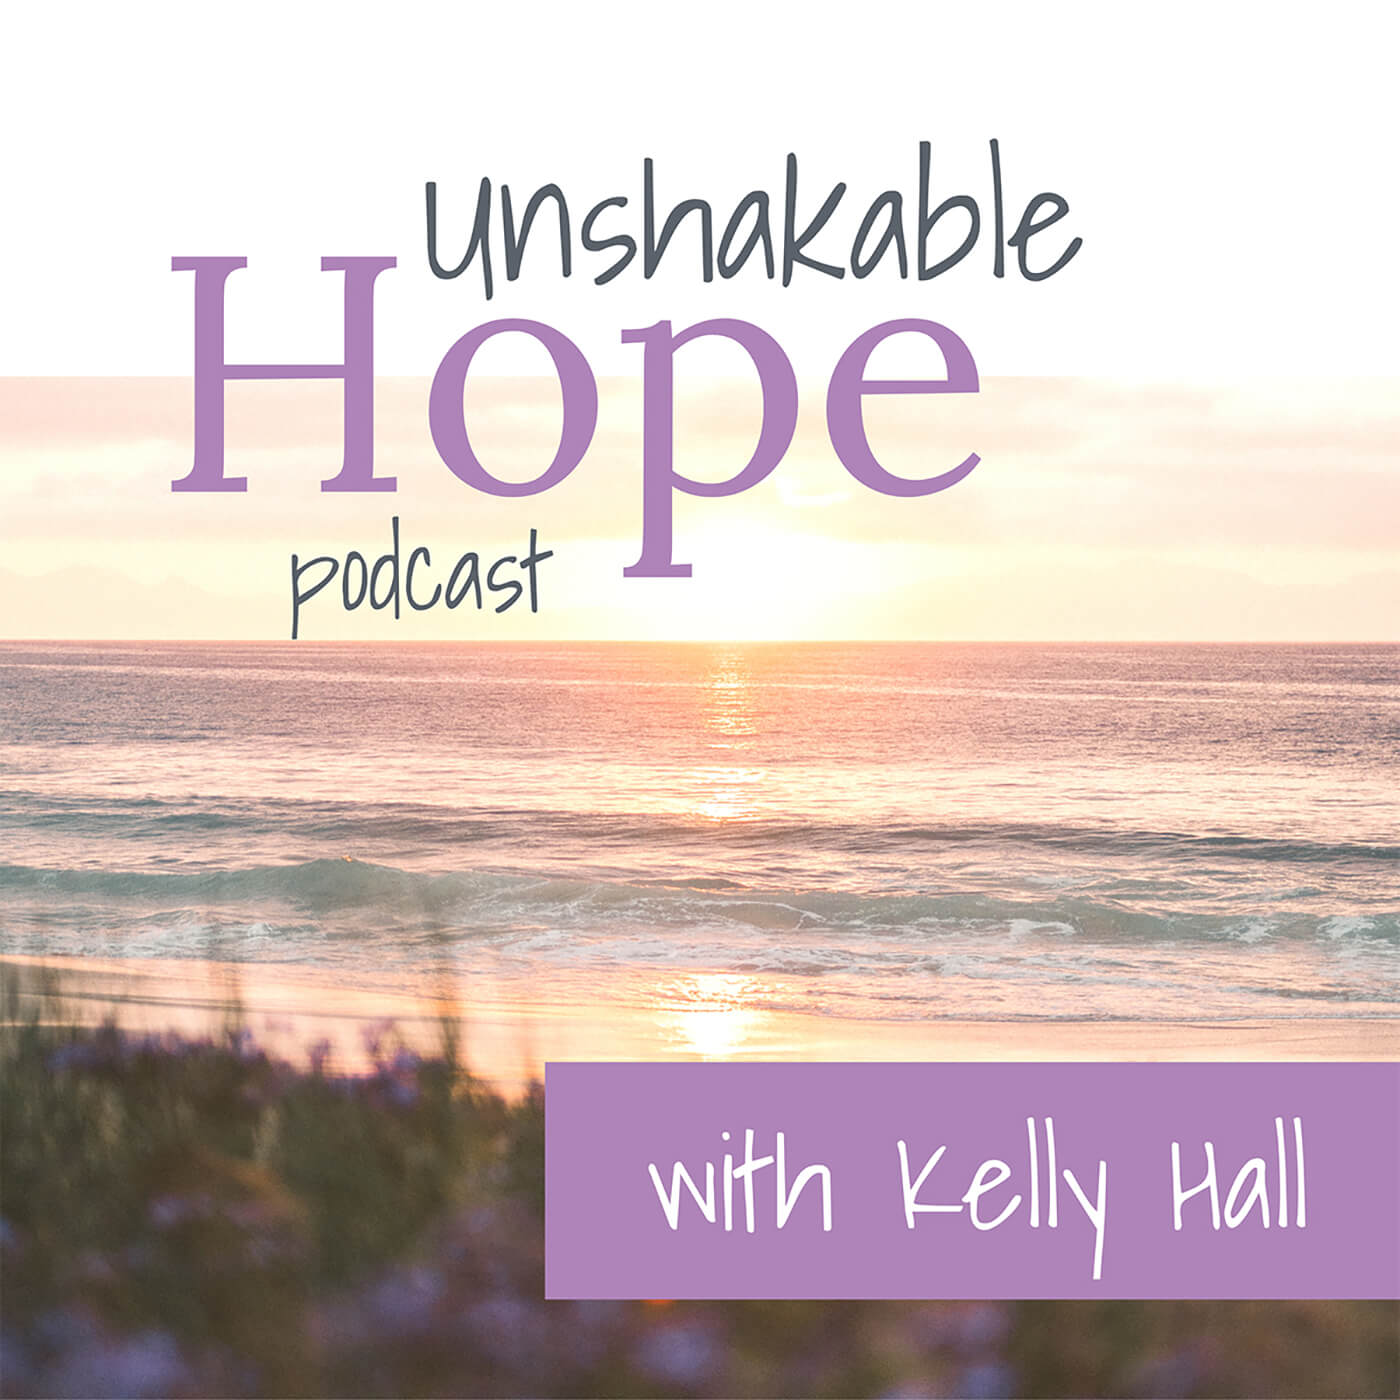 Unshakable Hope Podcast with Kelly Hall